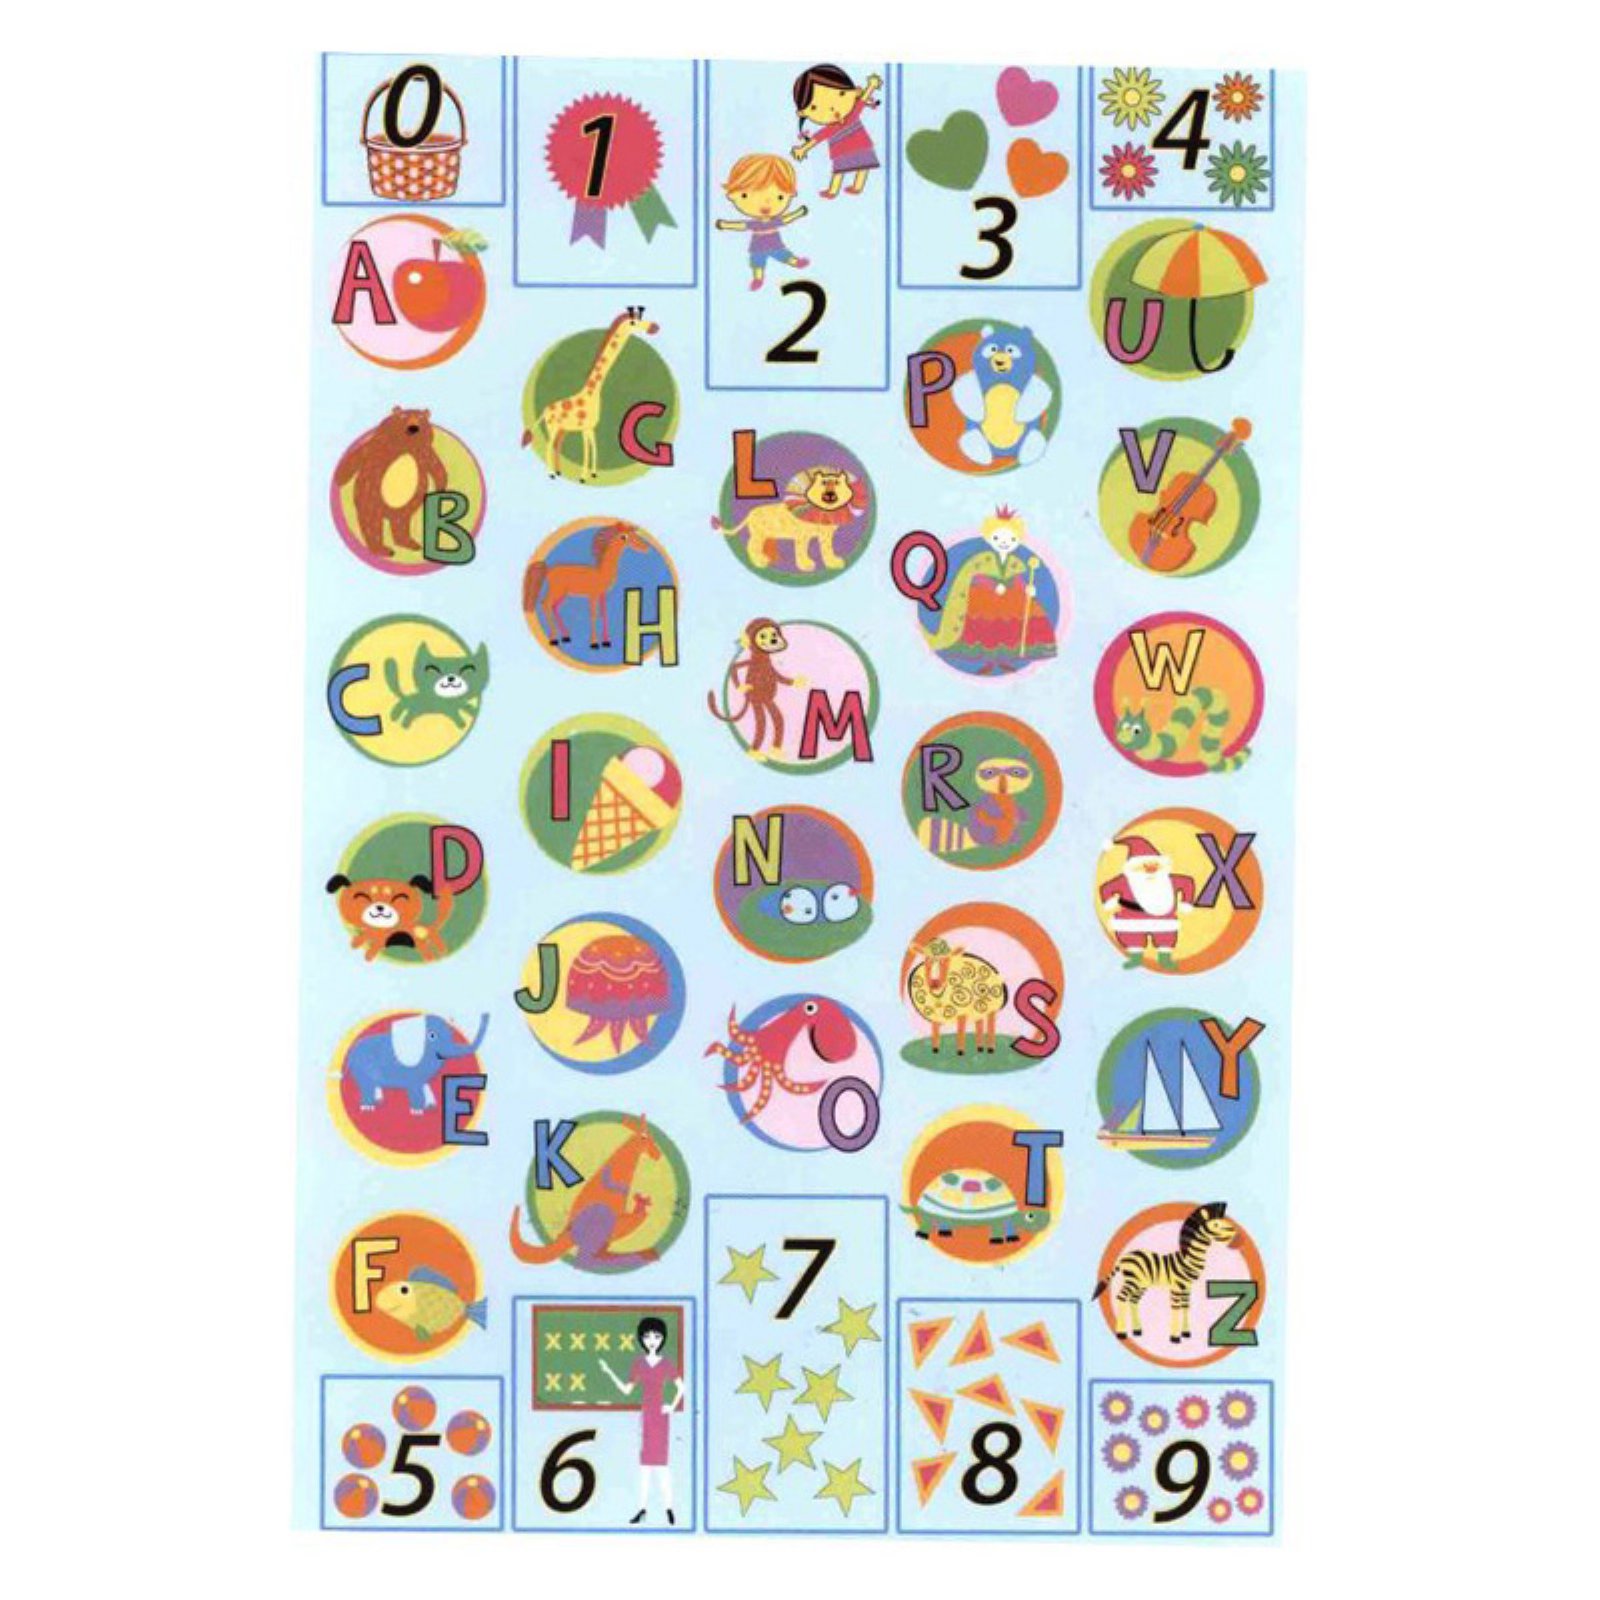 Fun Rugs Fun Time Area Rug FT-514 Now I Know My Abc's Multi-Color 6' 8" x 10' Rectangle - image 1 of 2